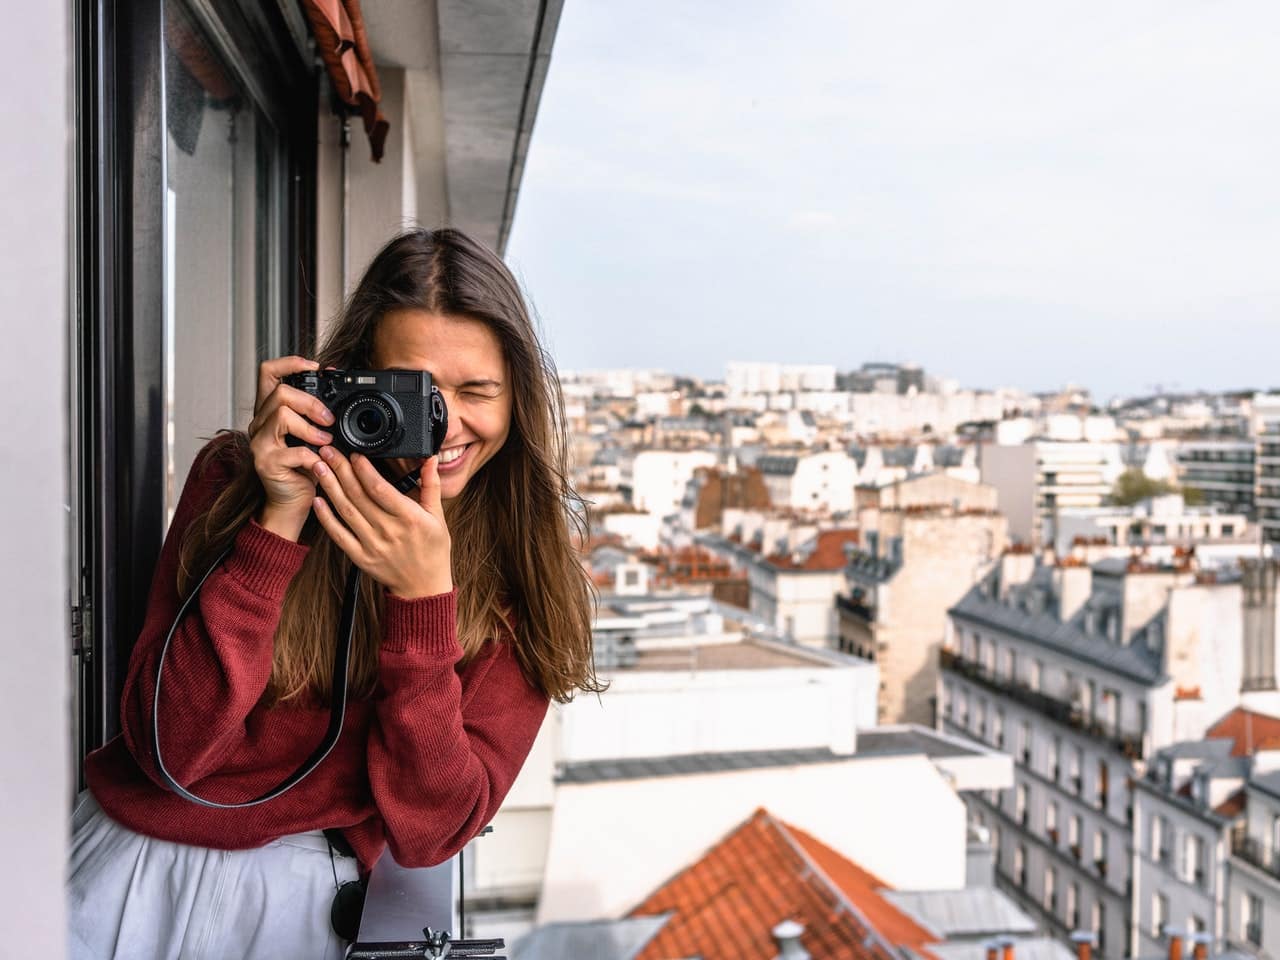 Girl Smiling While Taking a Picture in the Balcony